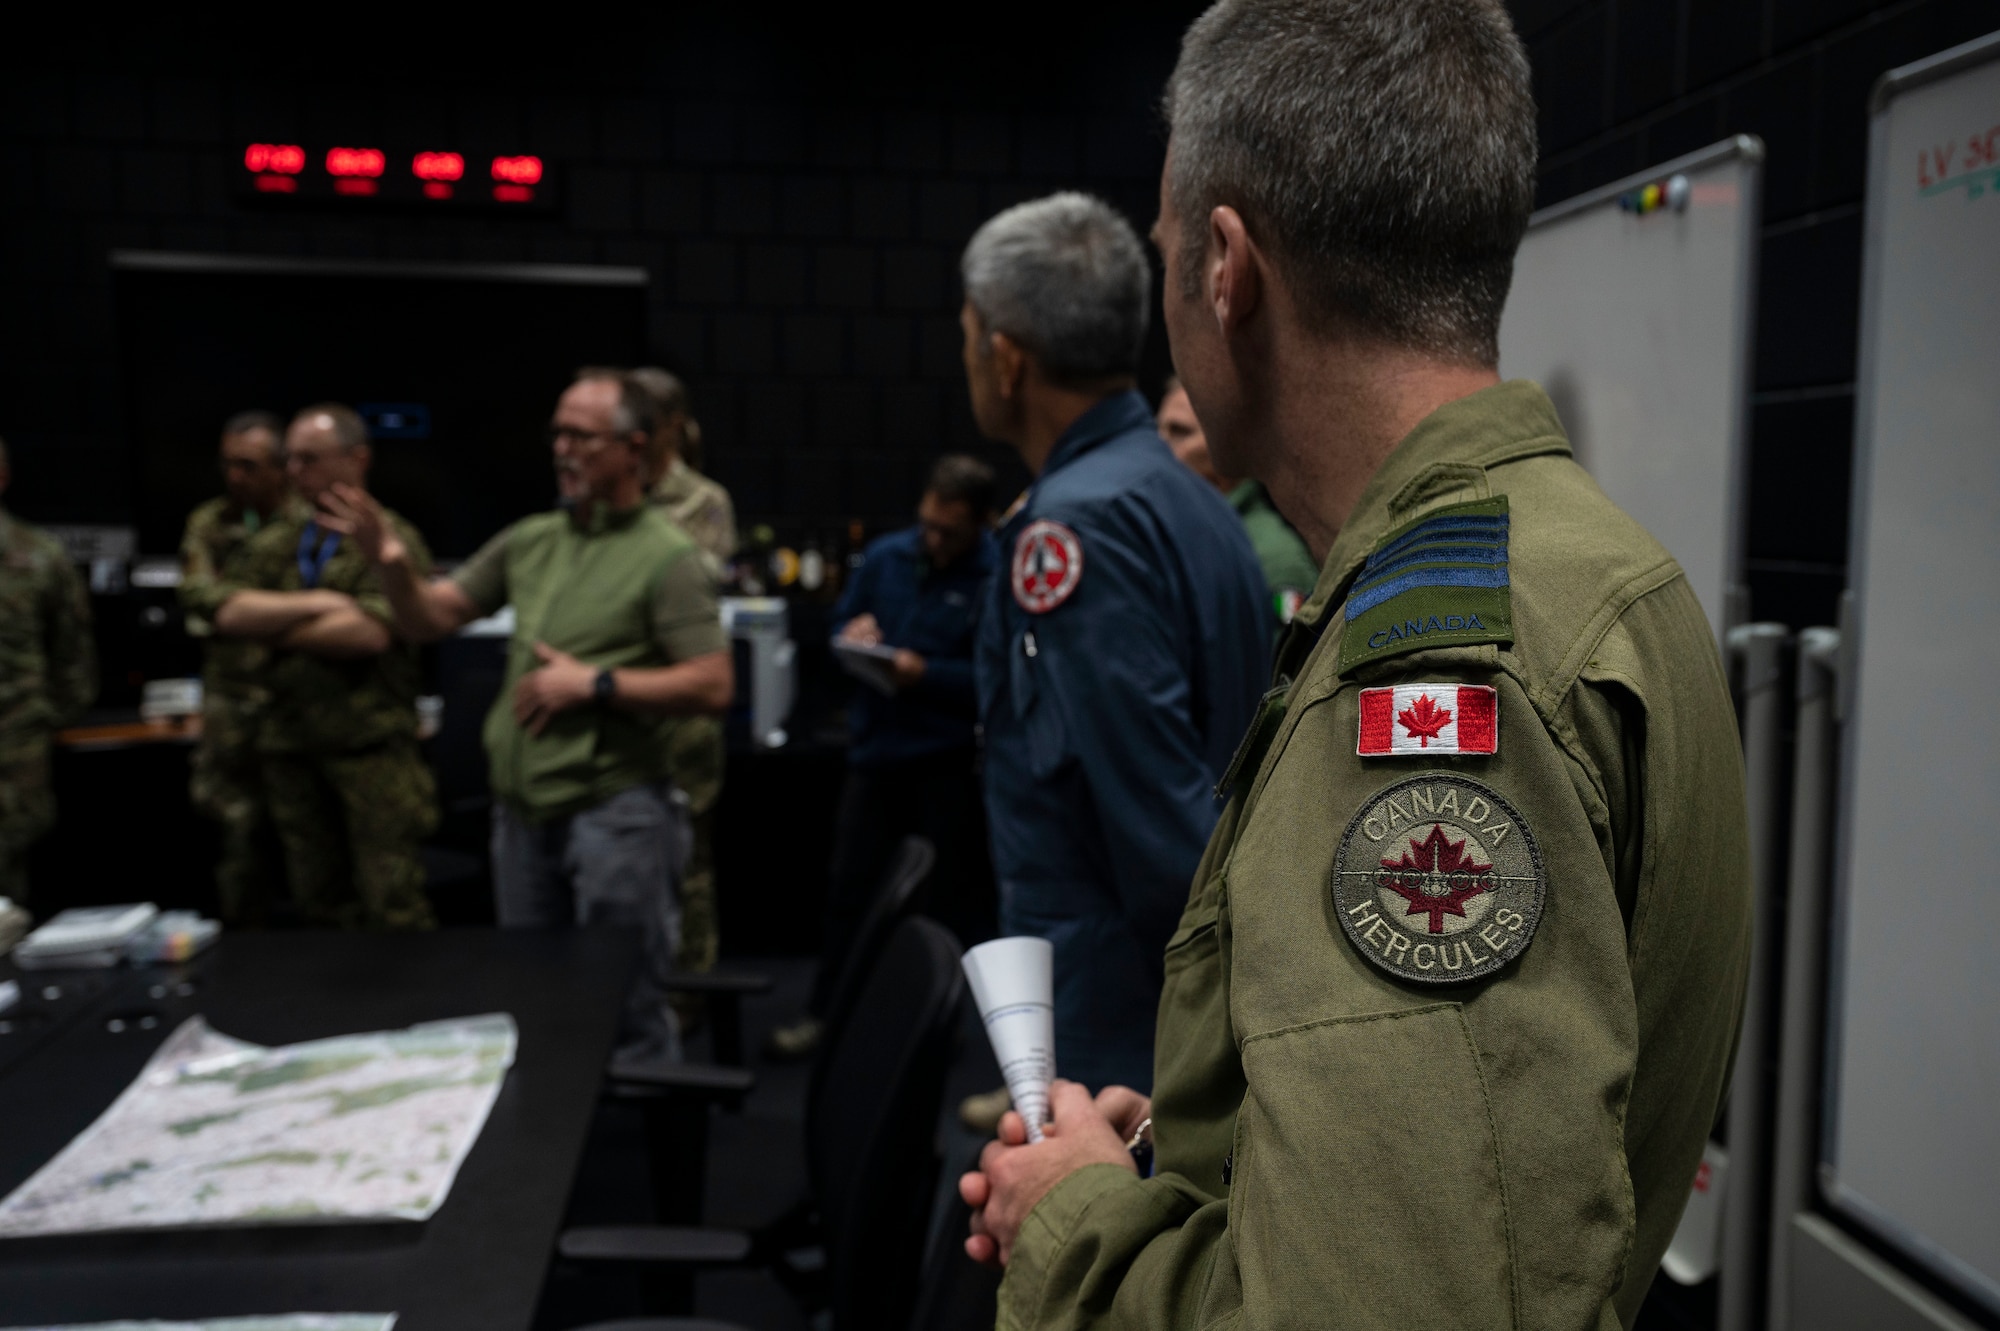 North Atlantic Treaty Organization distinguished visitors listen to a briefing at U.S. Air Force Europe- Air Forces Africa’s Warrior Preparation Center during exercise Spartan Bigfoot 21 at Einsiedlerhof Air Station, Germany